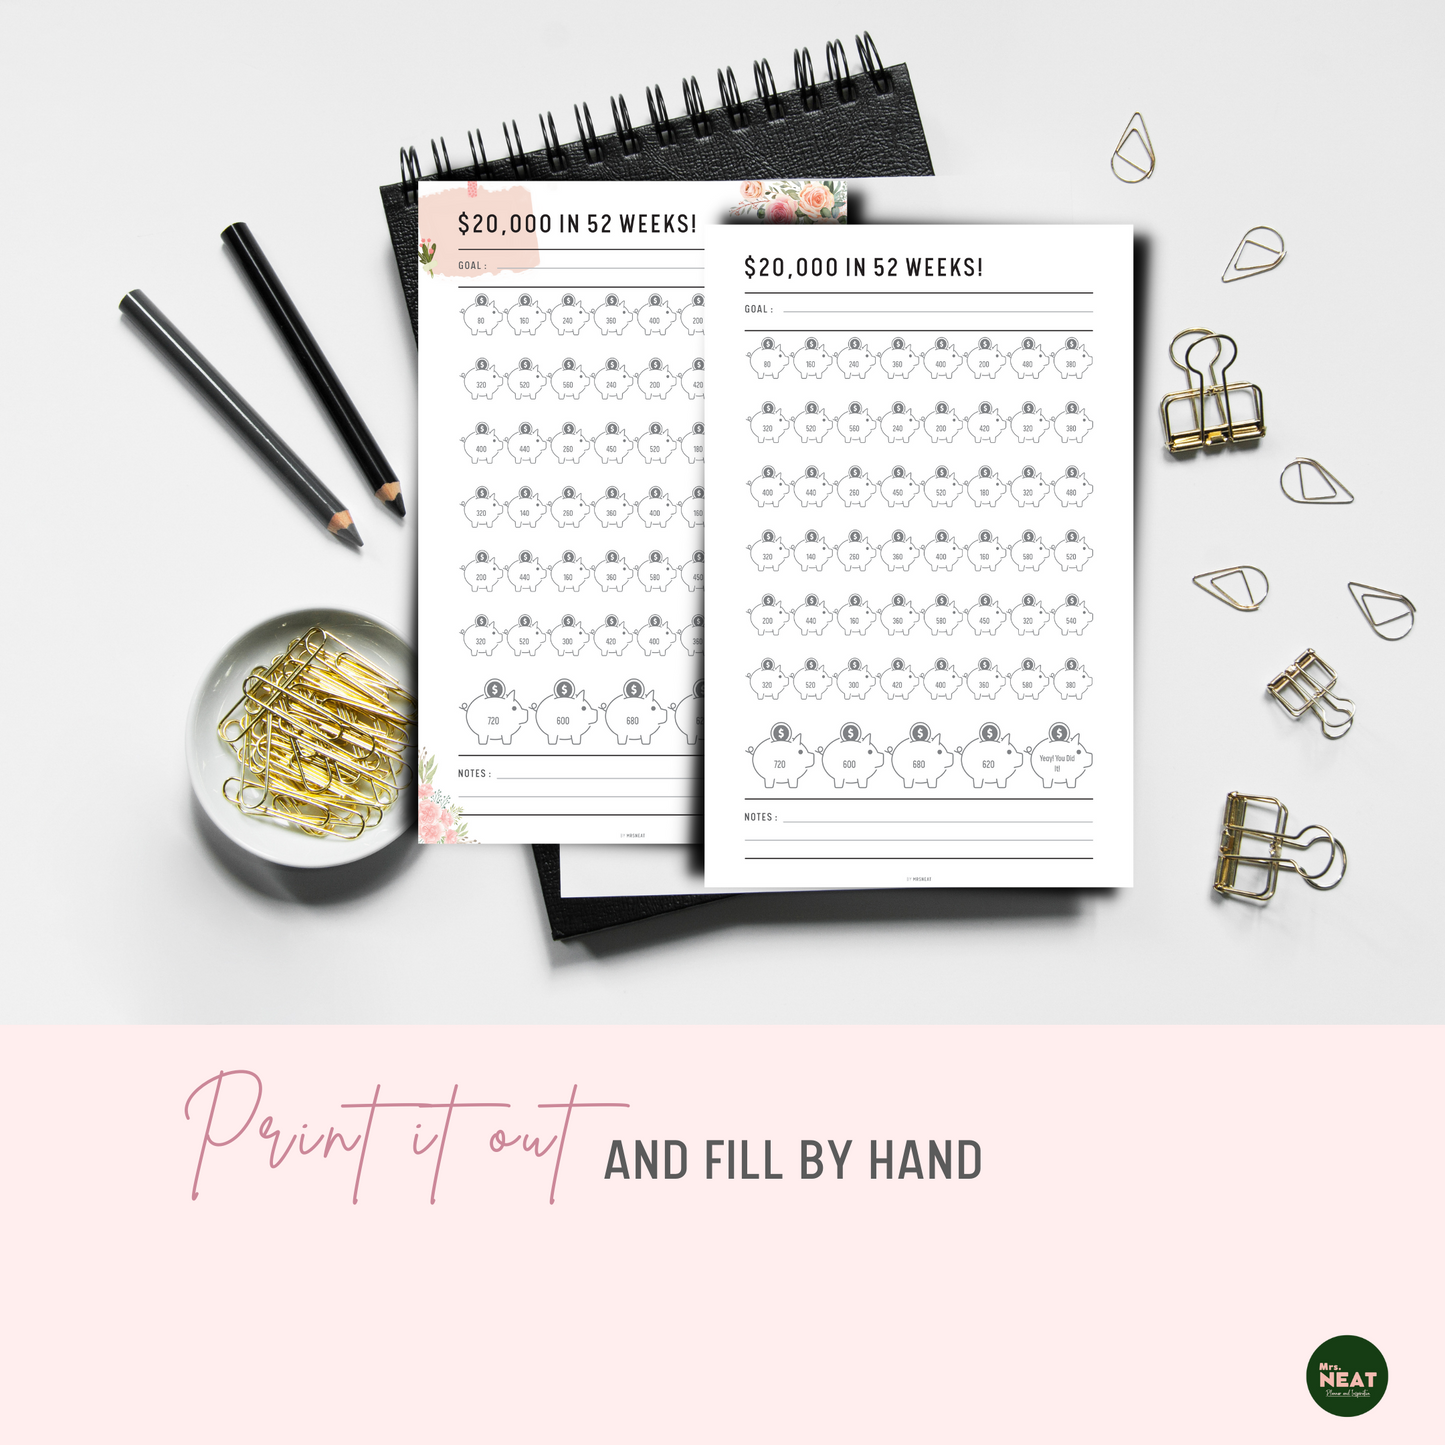 $20,000 Savings Challenge in 52 Weeks Printable Planner can be print out and fill by hand